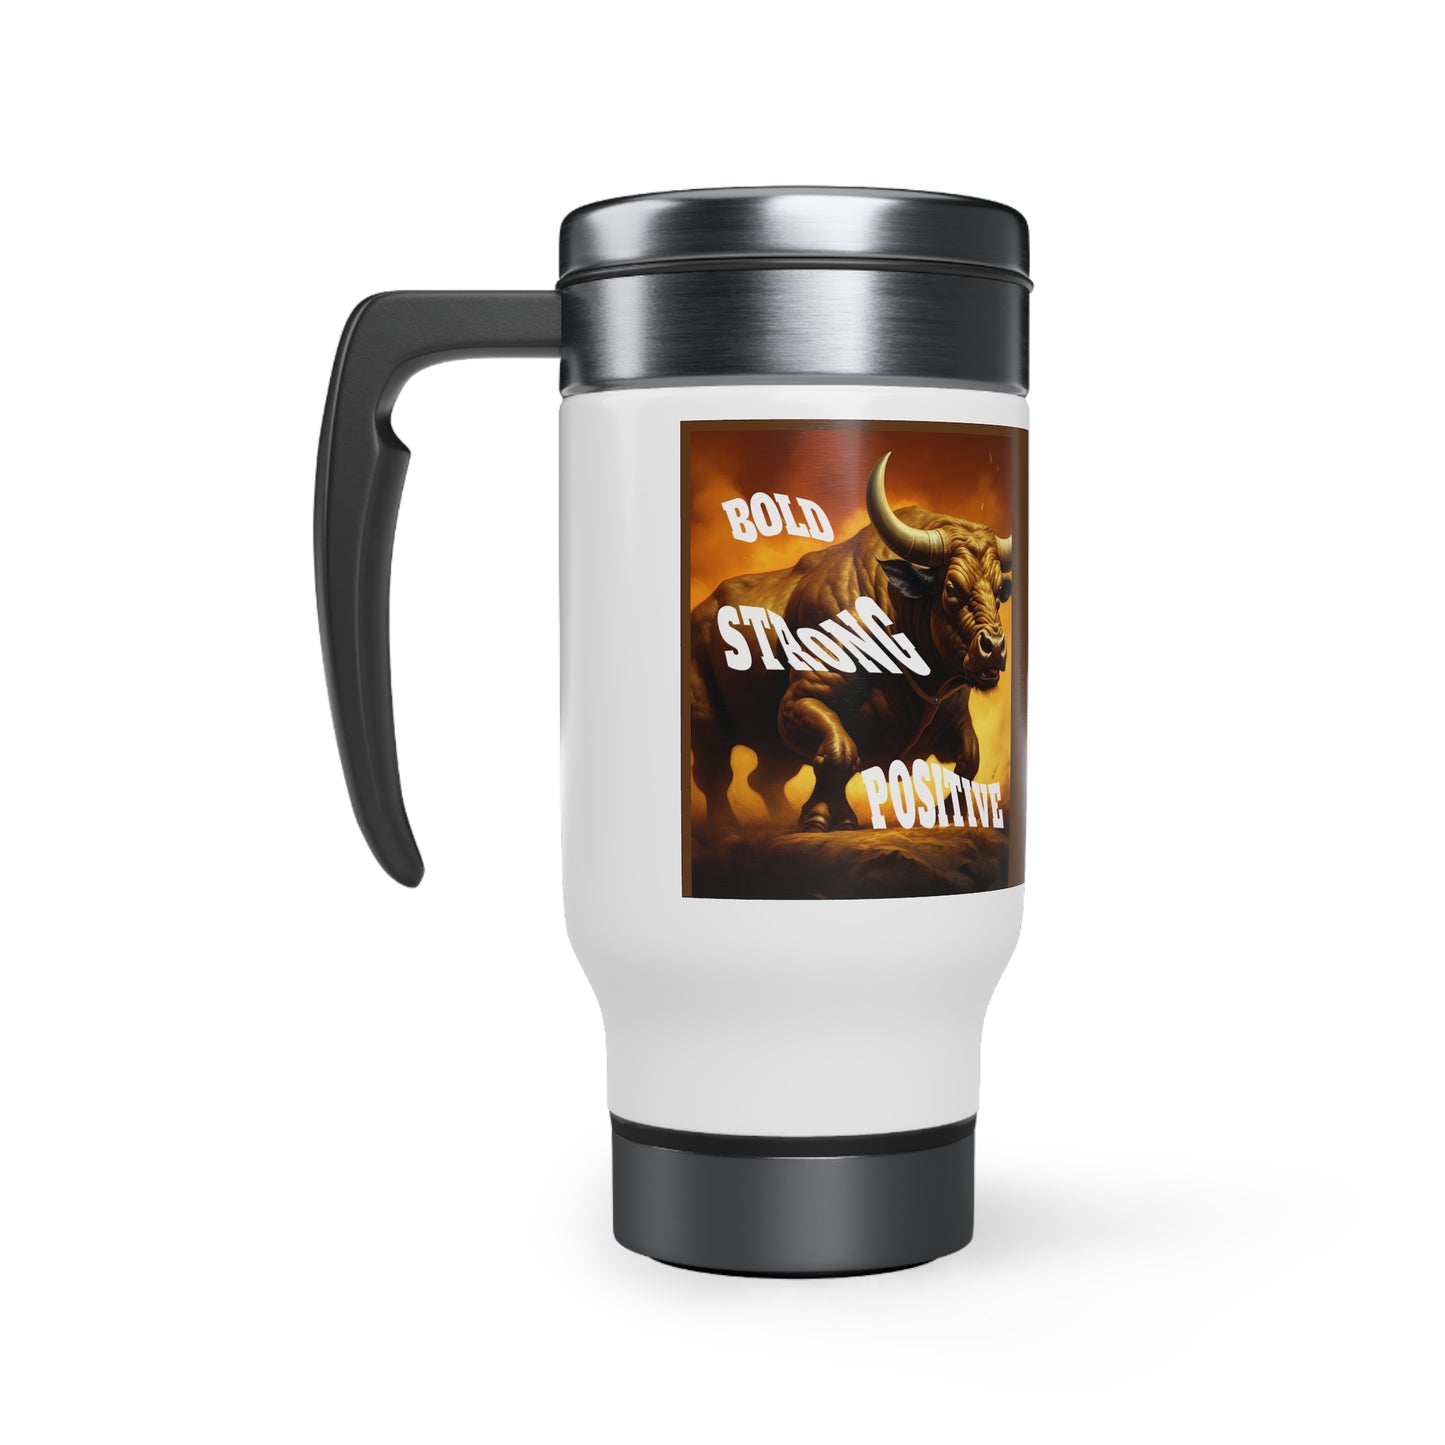 Rugged-Bull Stainless Steel Travel Mug with Handle, 14oz, Bold, Strong,Positive